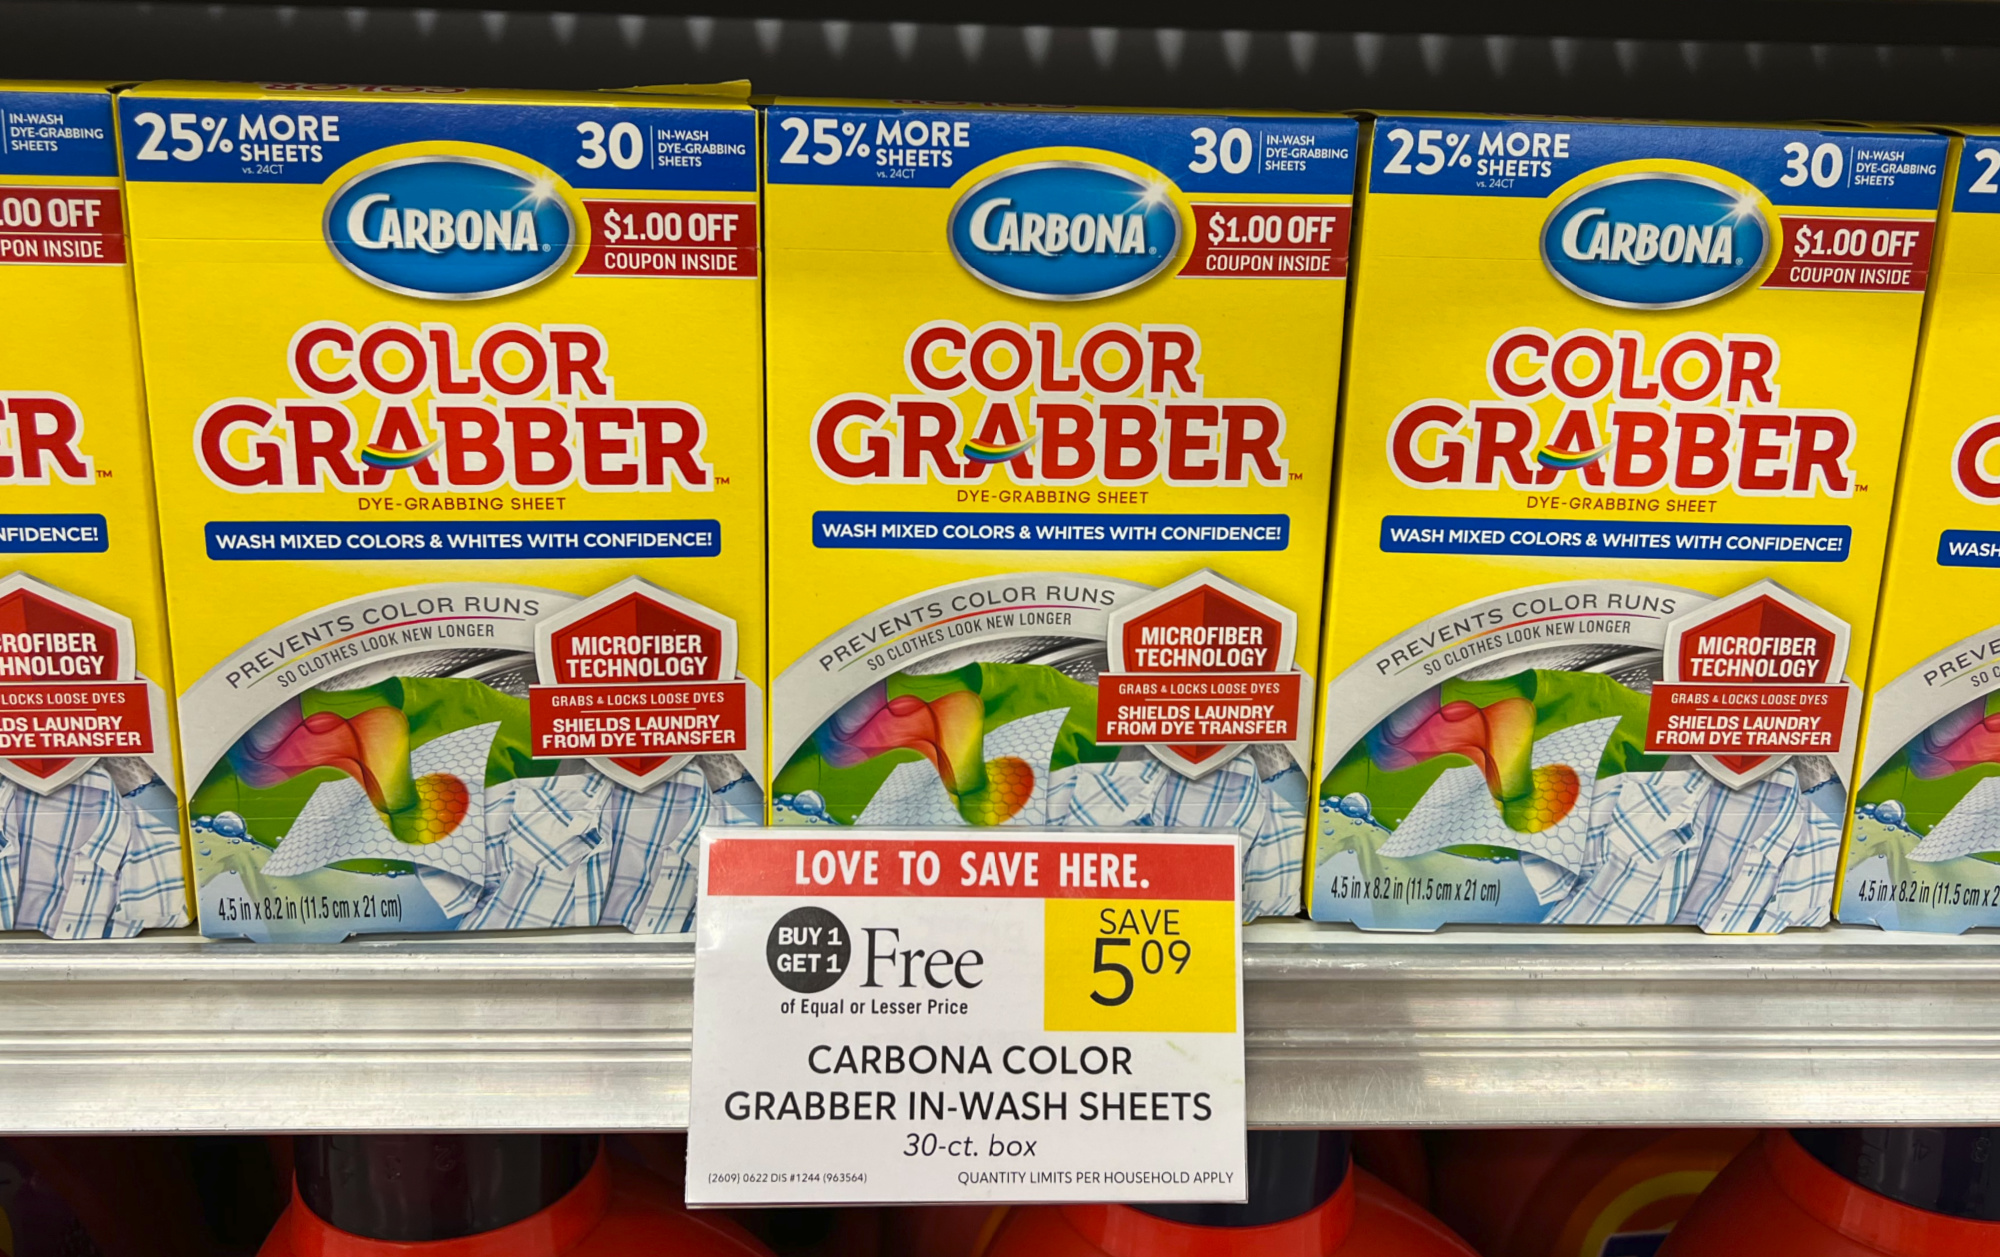 Carbona In-Wash Color Grabber Sheets As Low As $1.45 At Publix